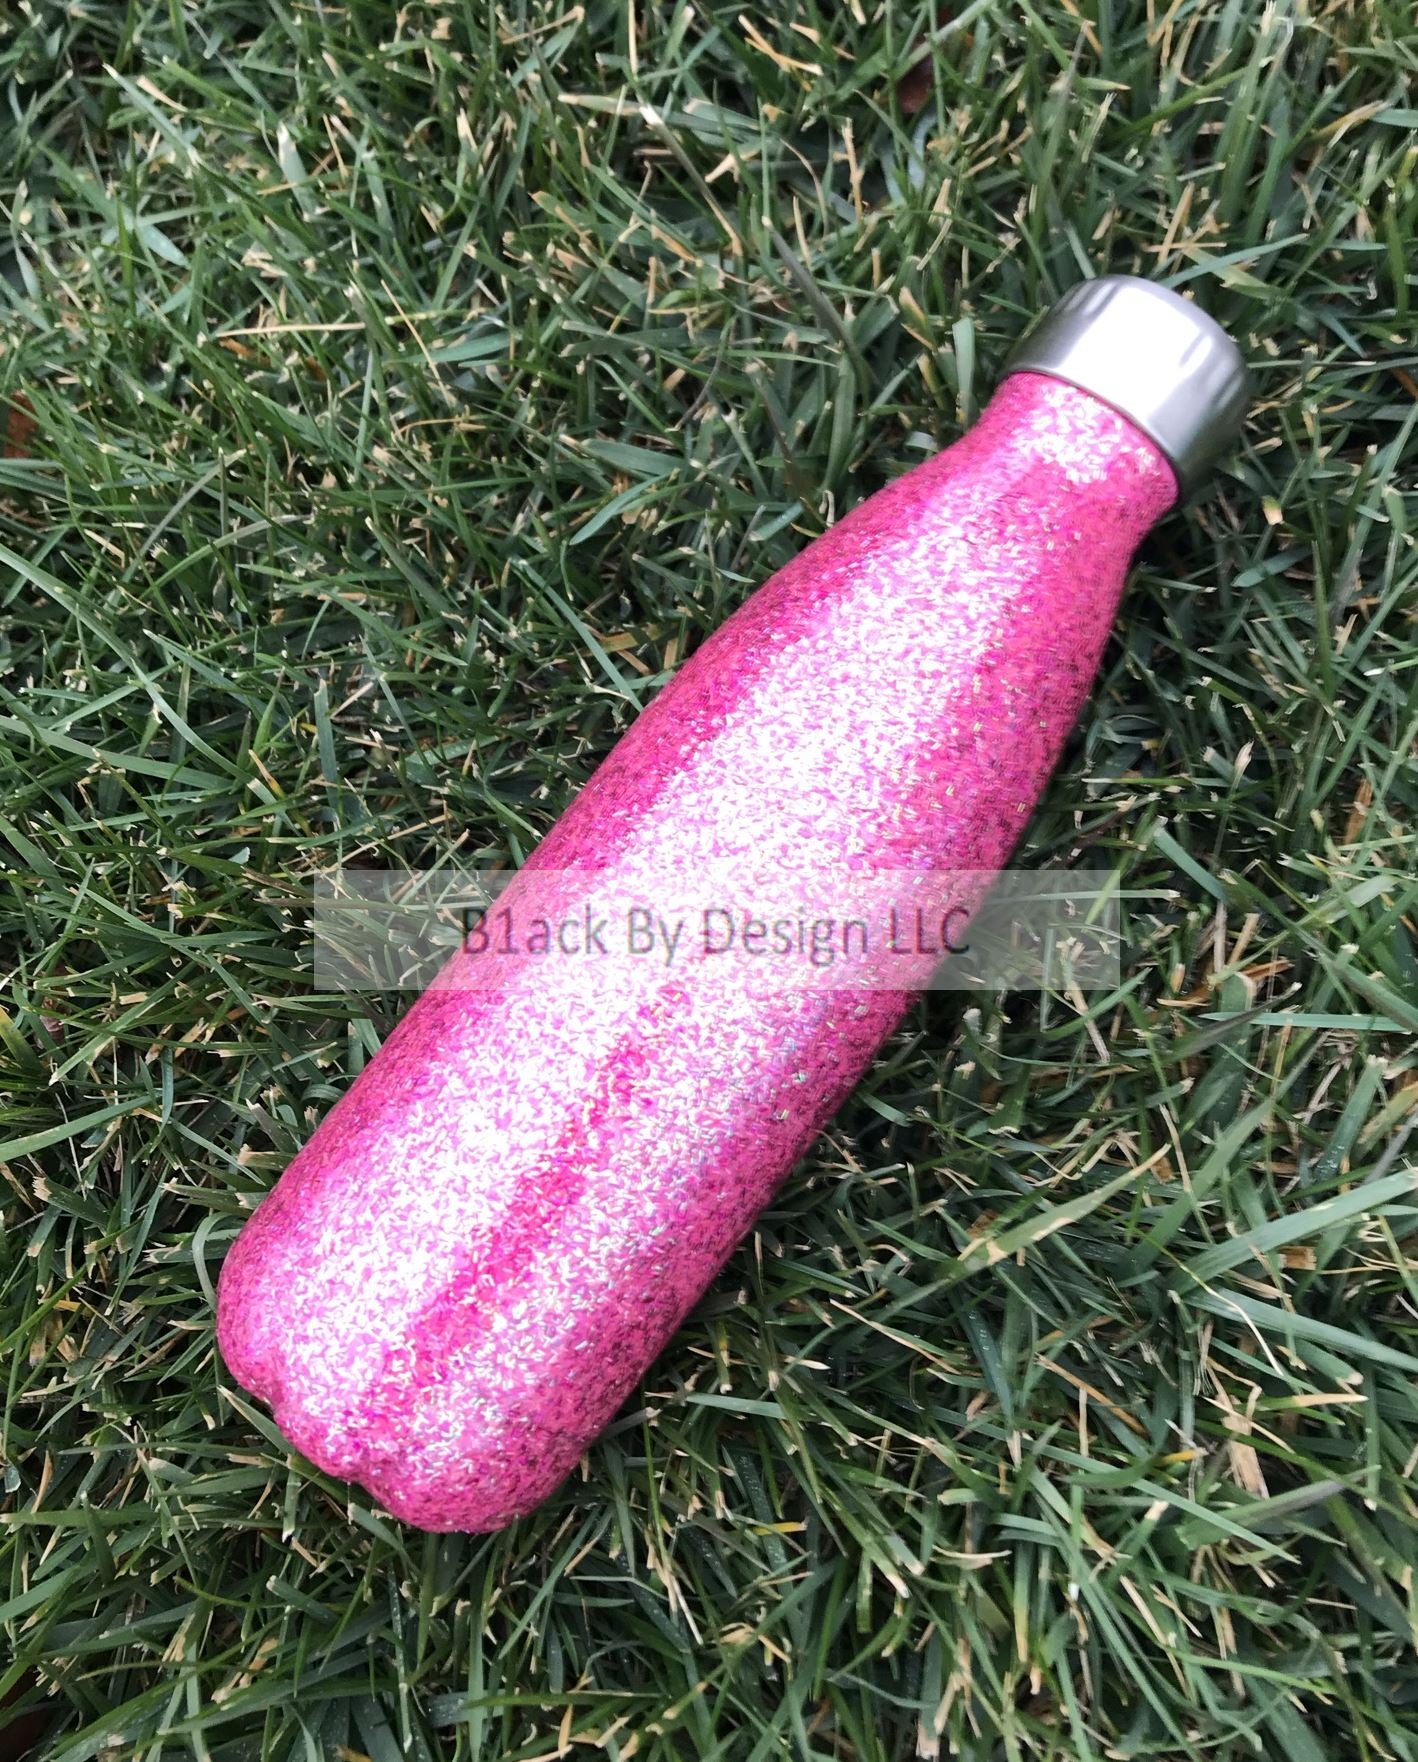 Stainless Steel Water Bottle Water Bottle B1ack By Design LLC Holographic Pink Glitter Glitter Only 